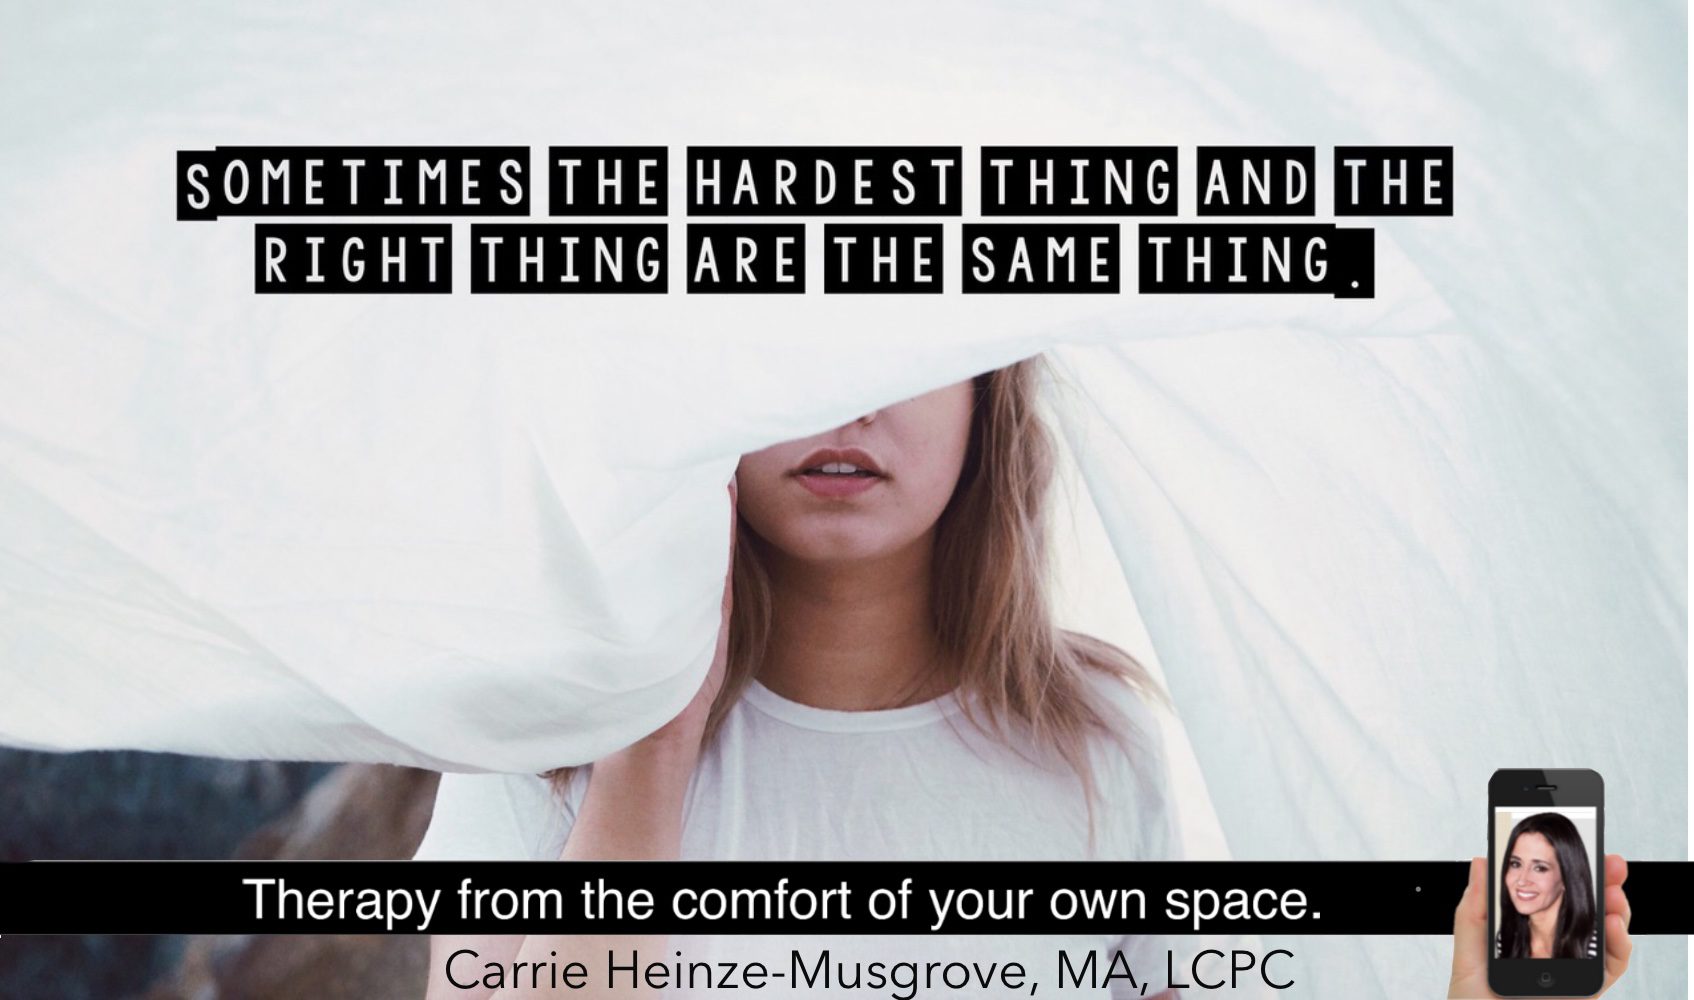 The hardest thing vs the right thing.